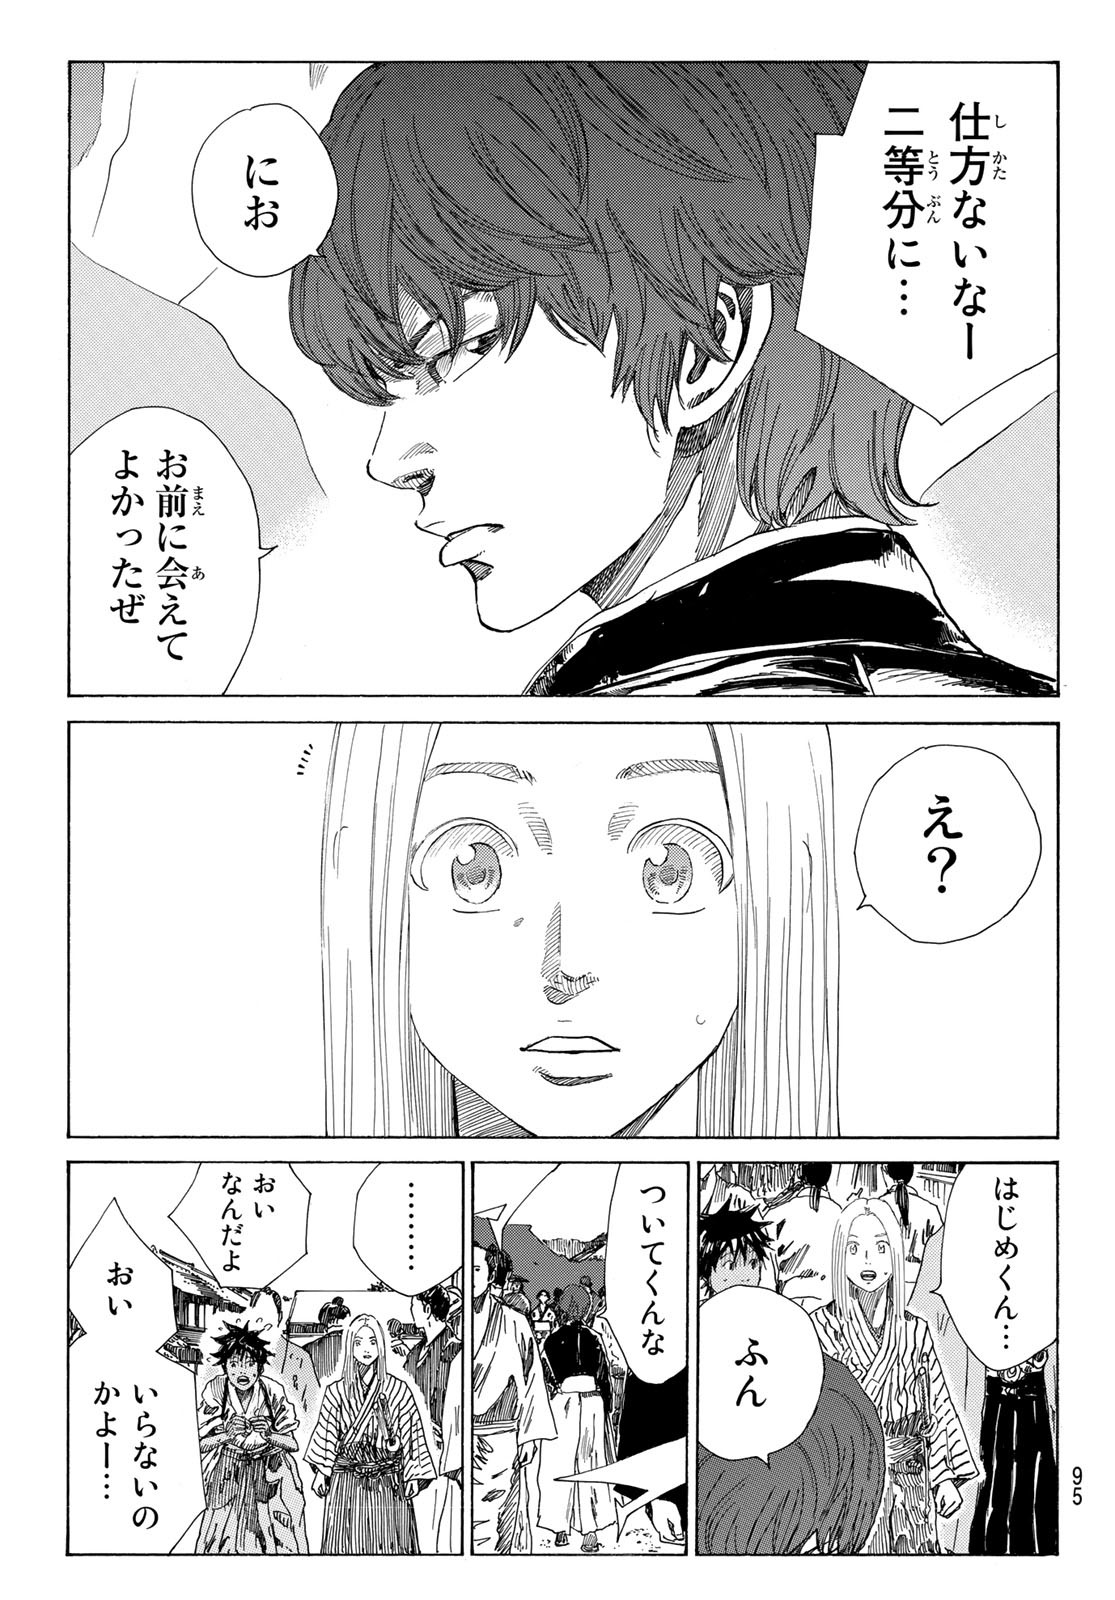 An Mo Miburo 第41話 - Page 10